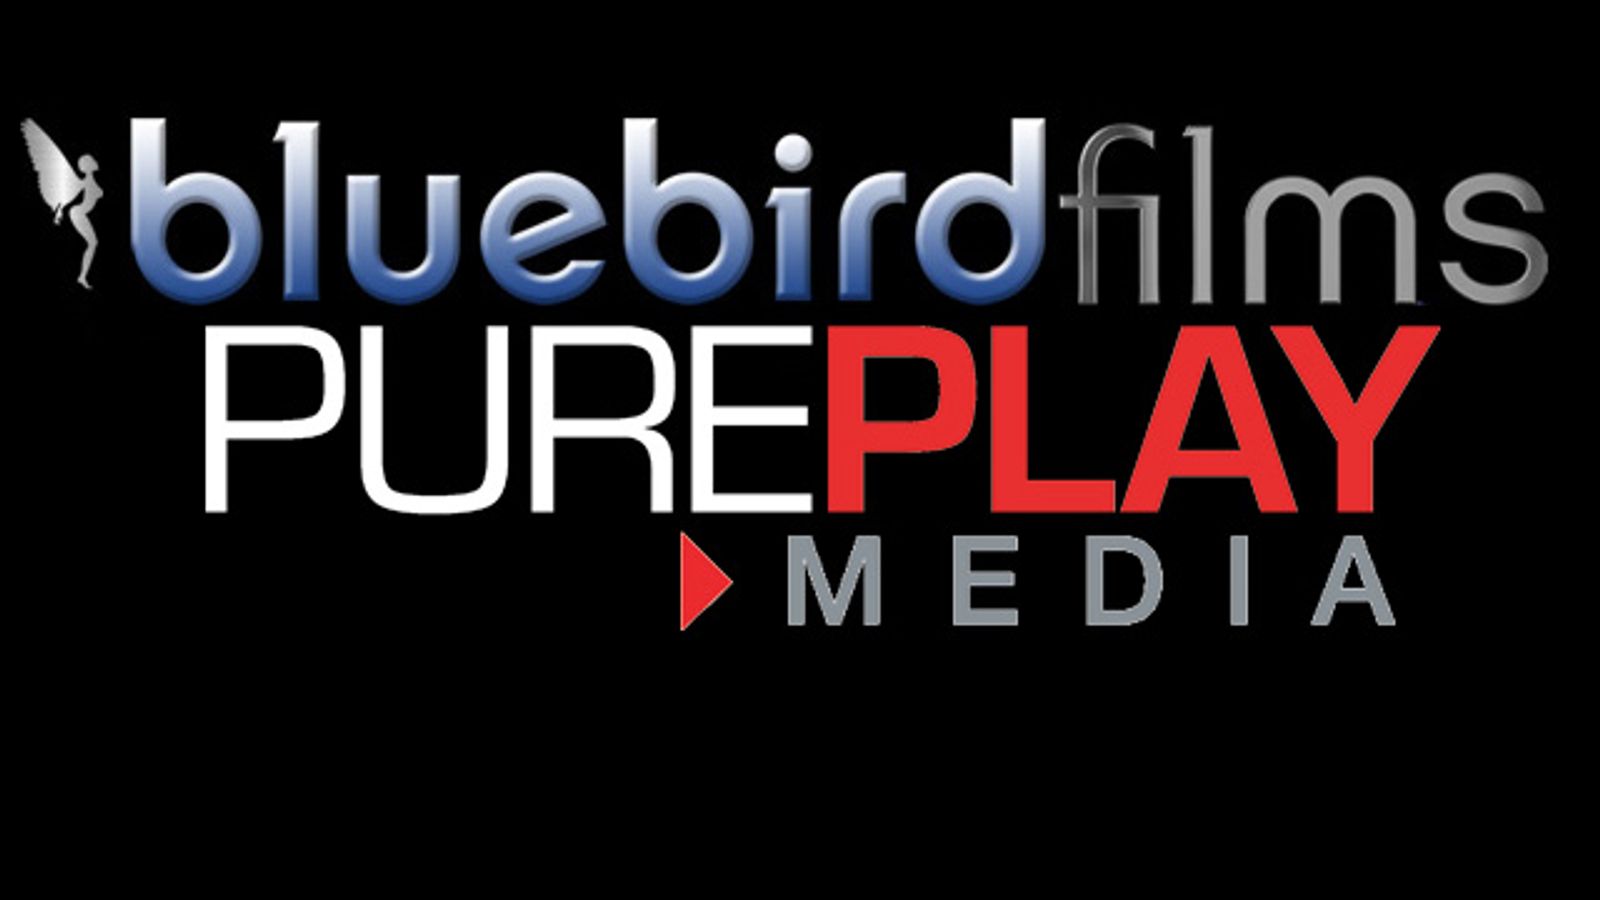 Pure Play Media Adds Bluebird Films to Its Roster of Studios